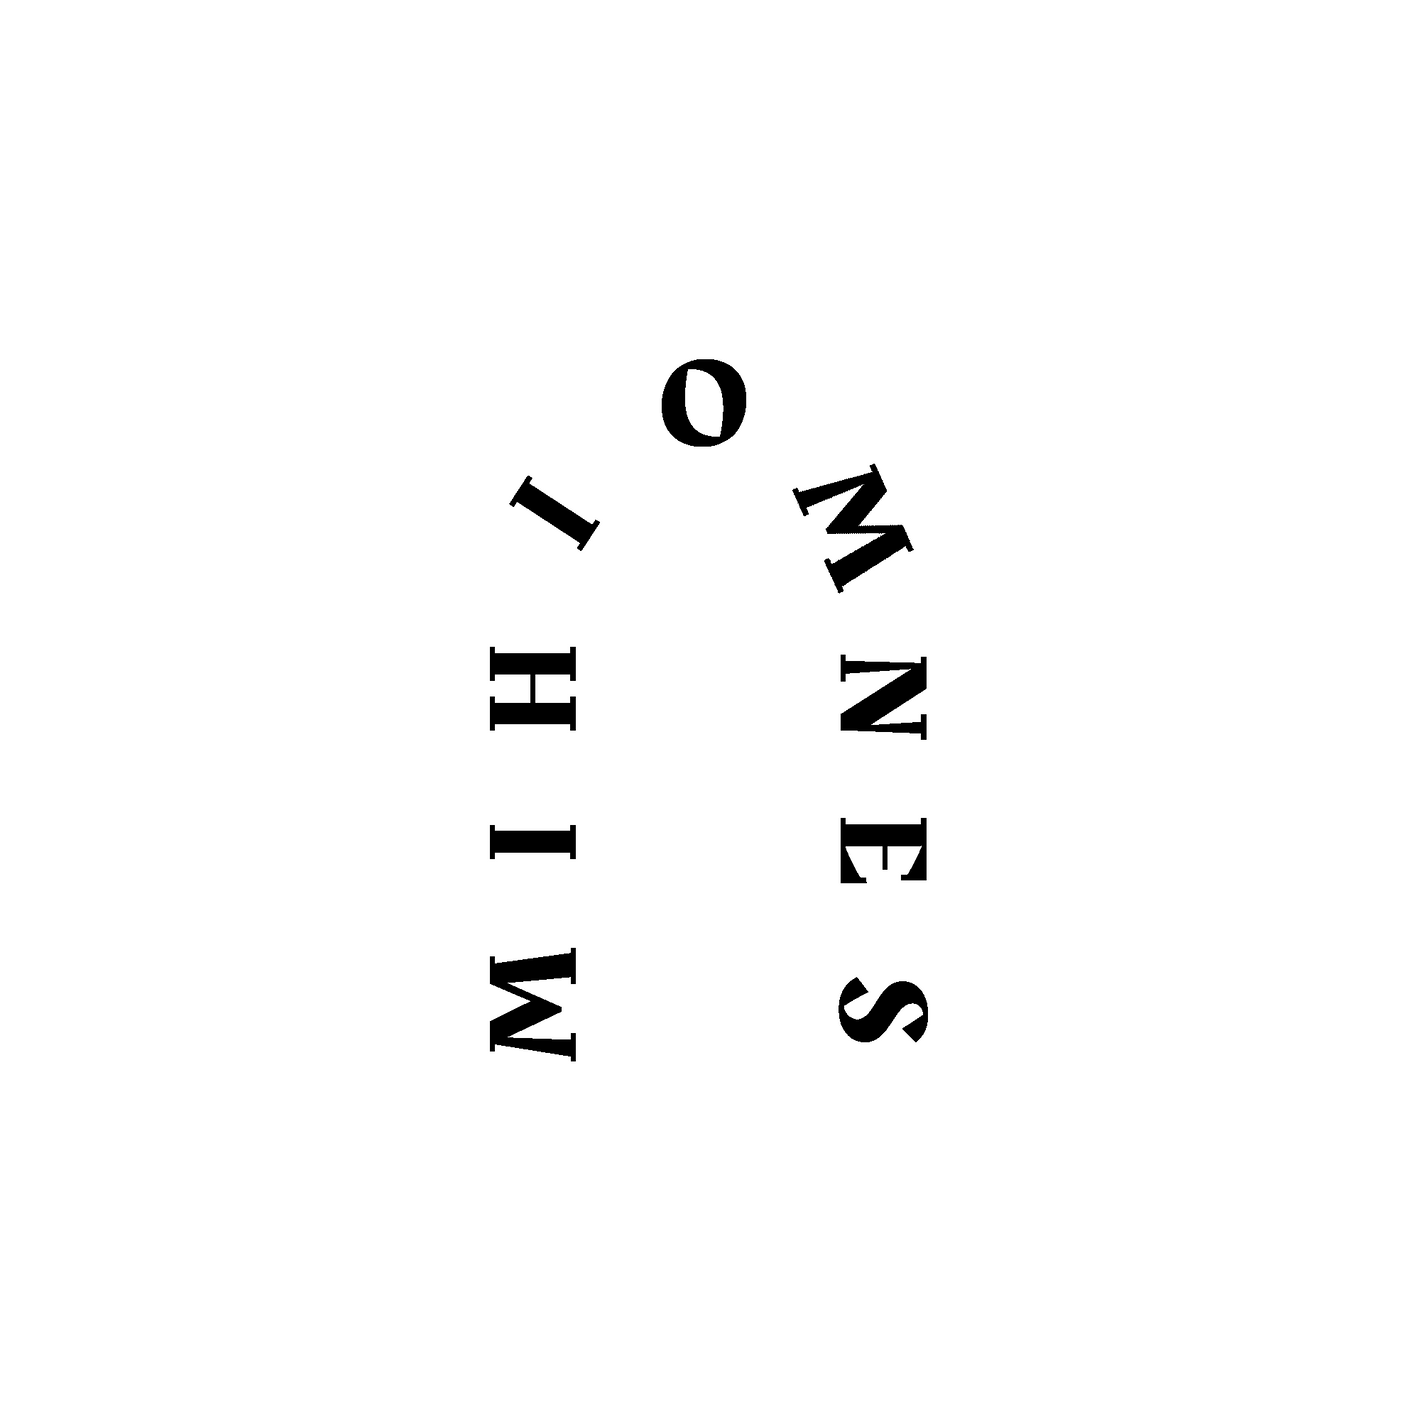 Mihi Omnes | OlIO - A New York Based Music & Arts Collective